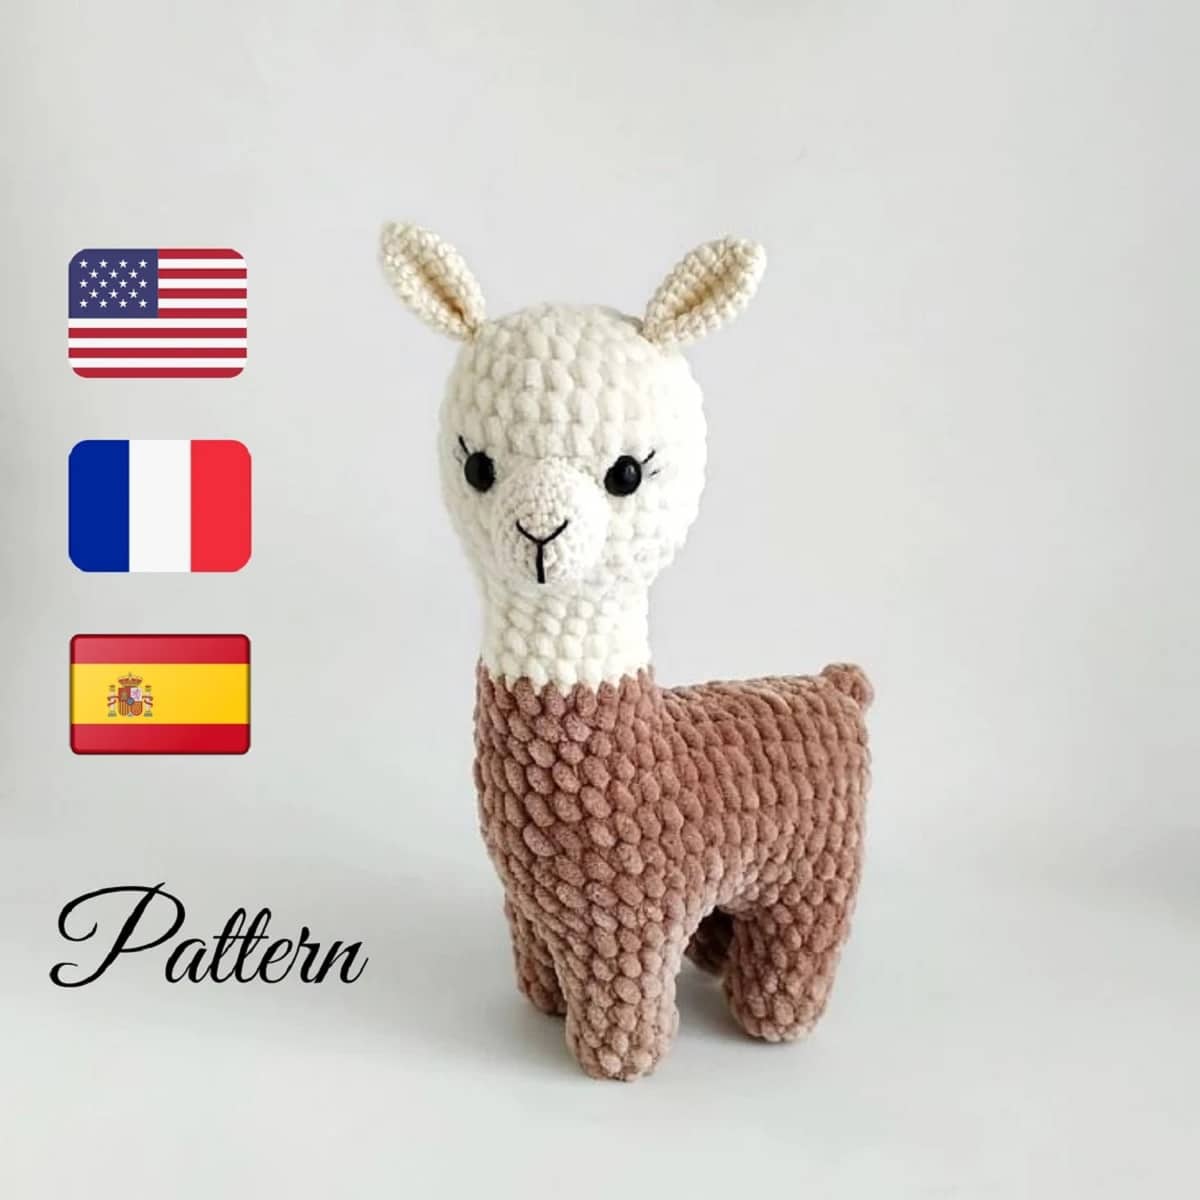  Crochet stuffed llama with brown legs and body, a white head with black eyes and nose on a white background.